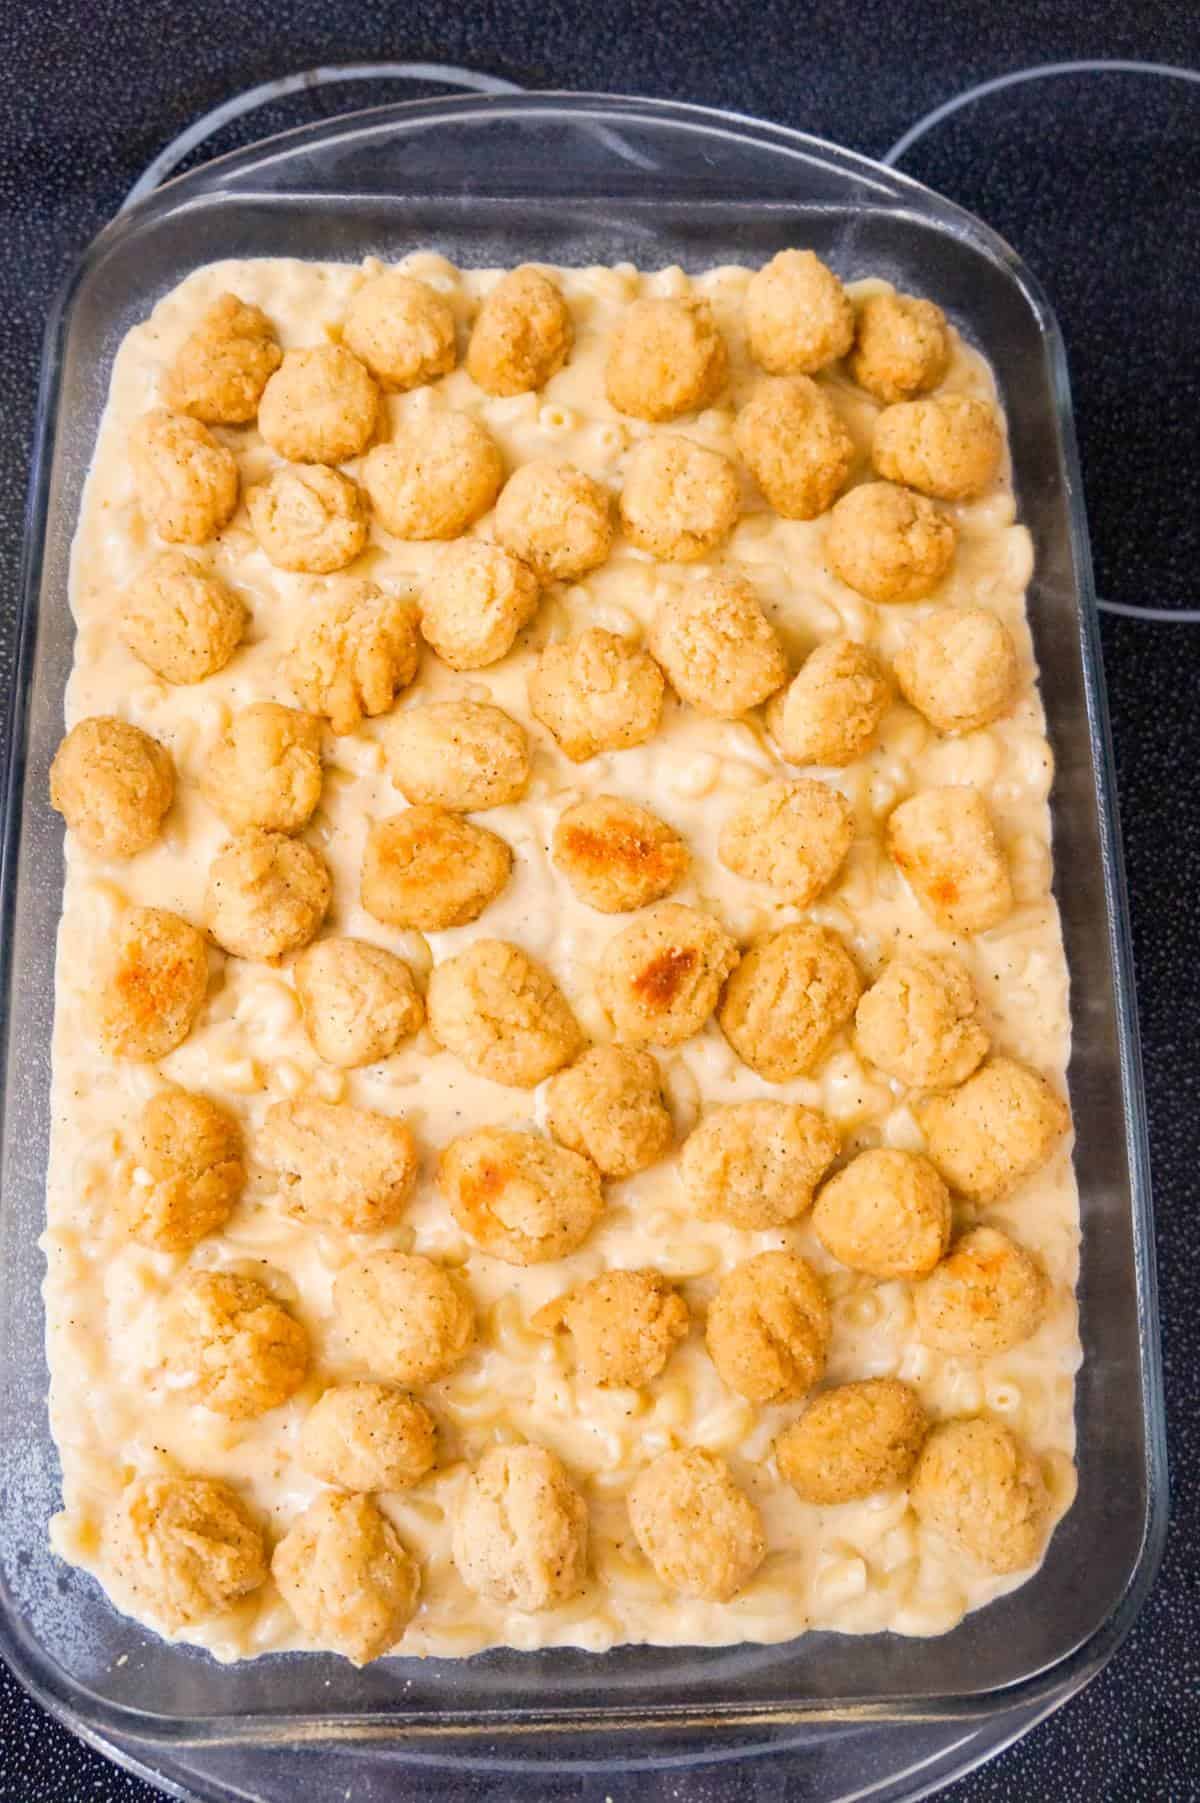 popcorn chicken on top of mac and cheese in a baking dish